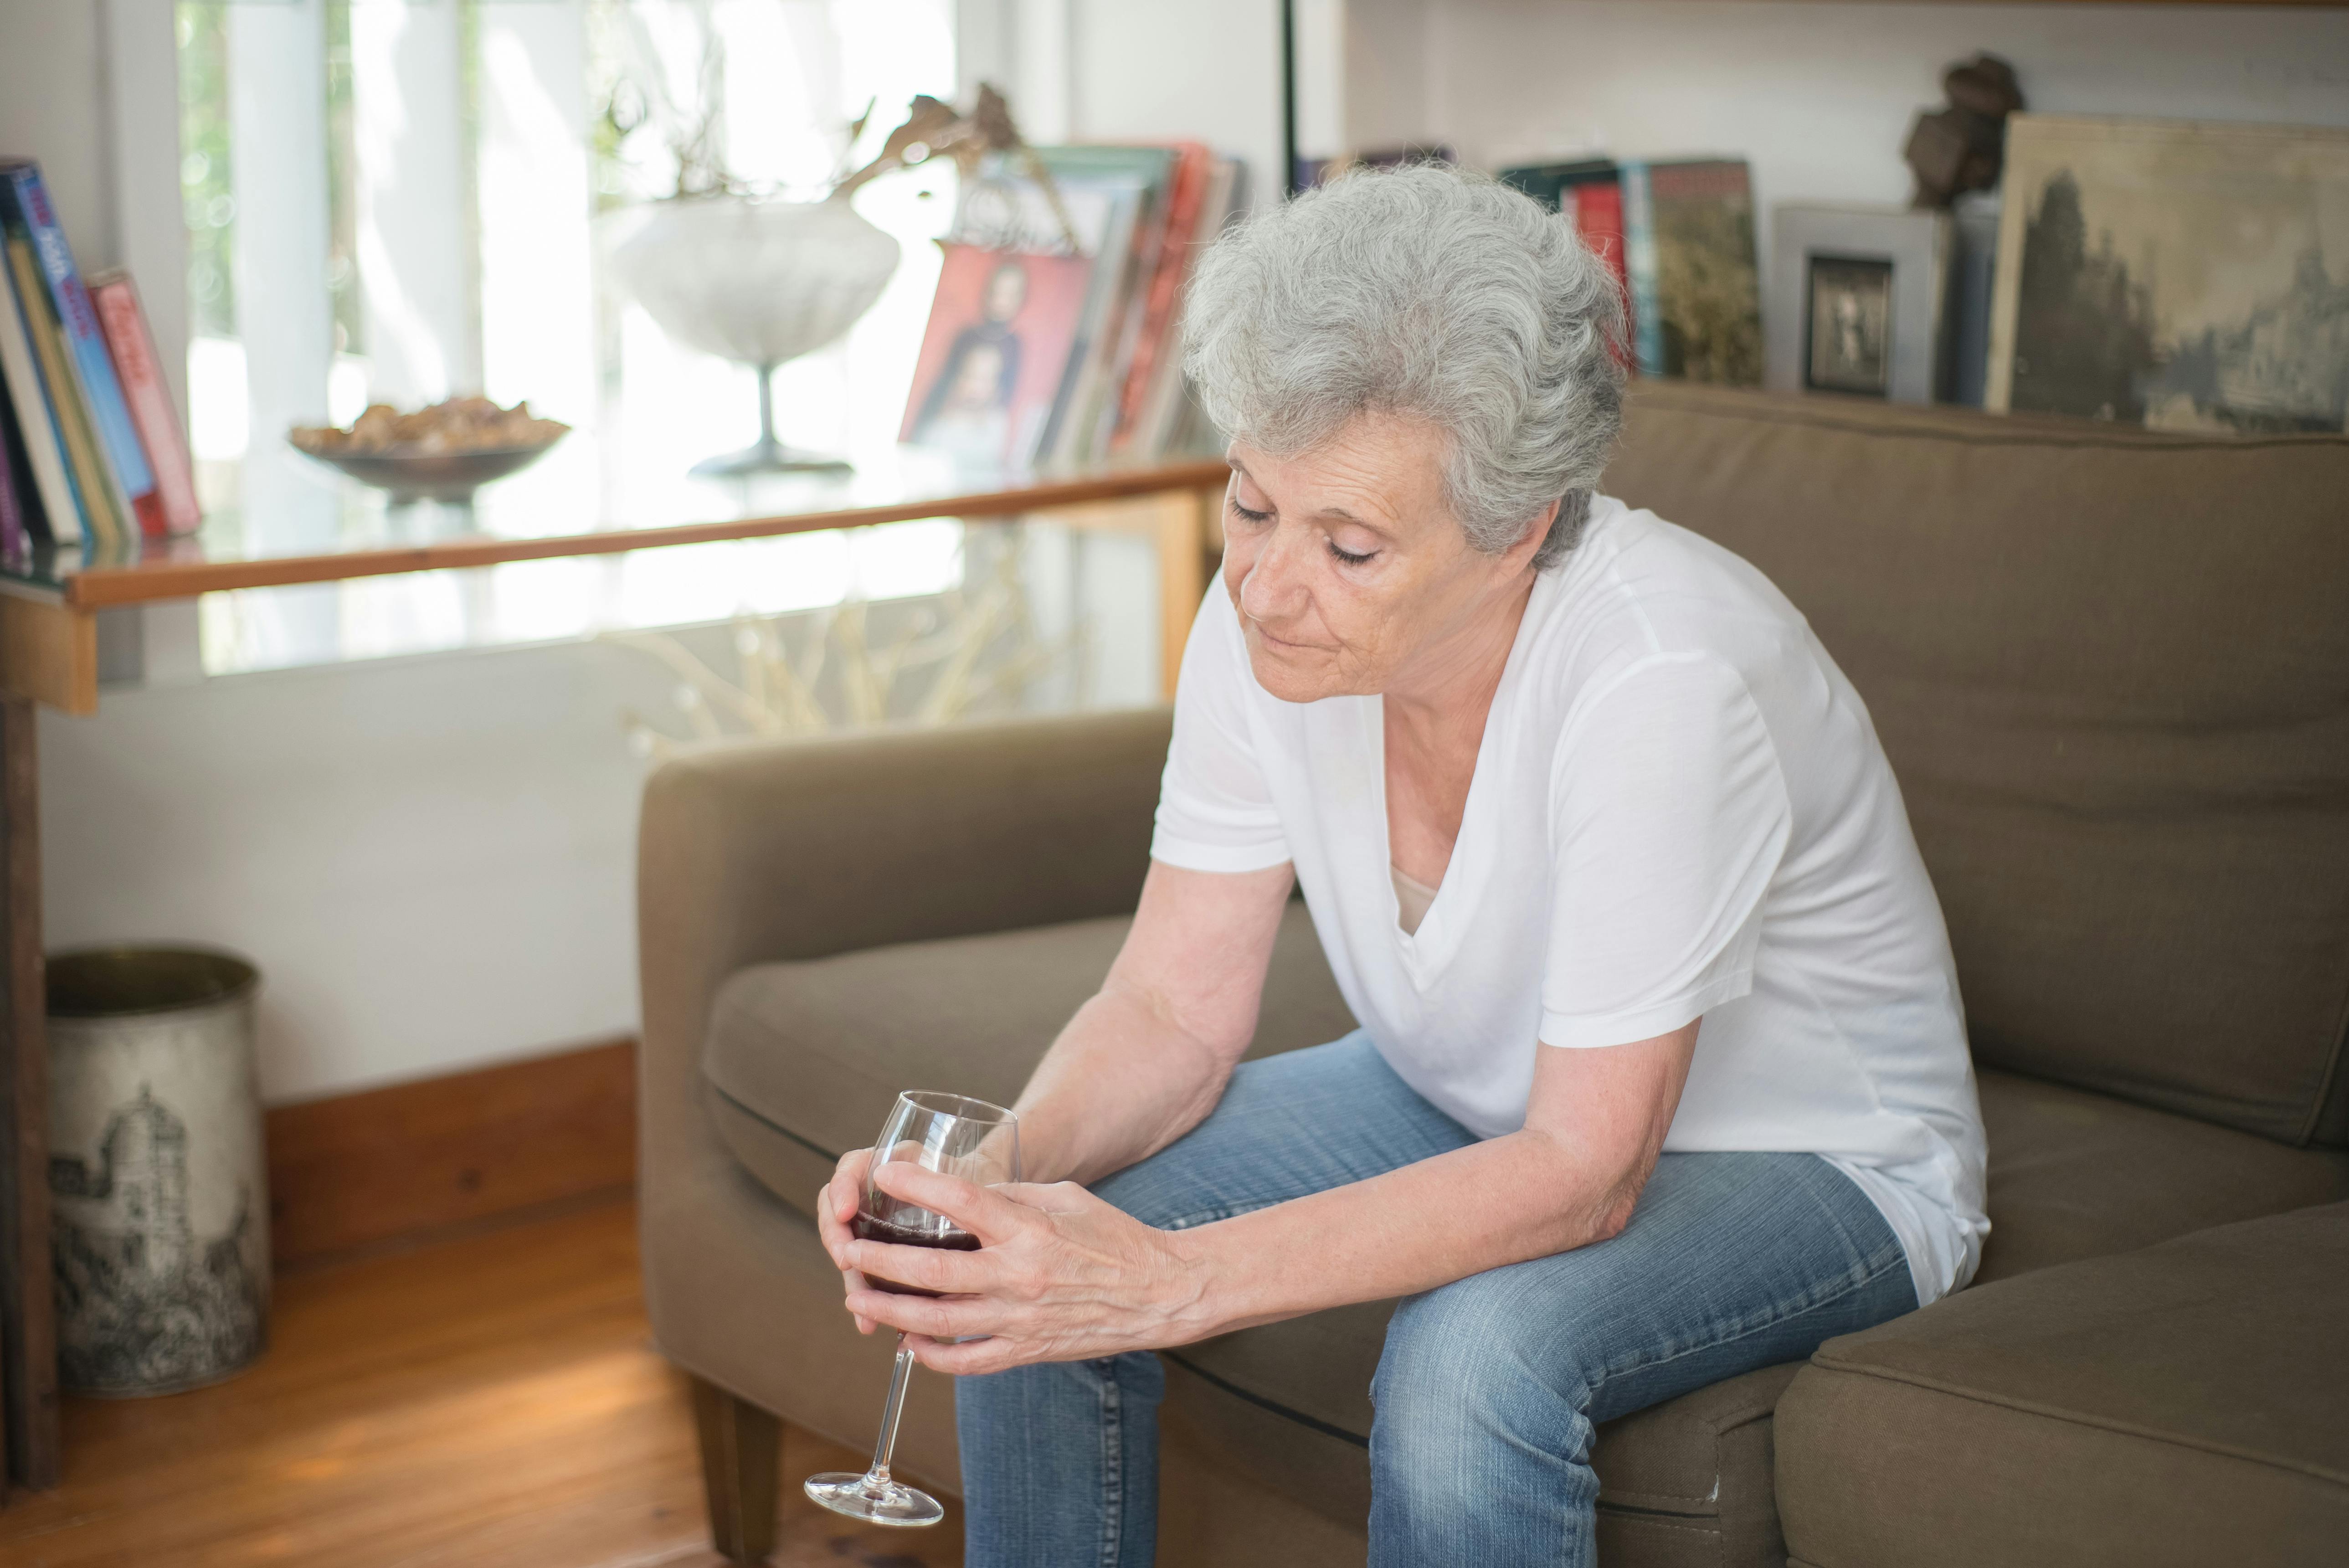 A sad-looking woman drinking a beverage while seated on a couch | Source: Pexels